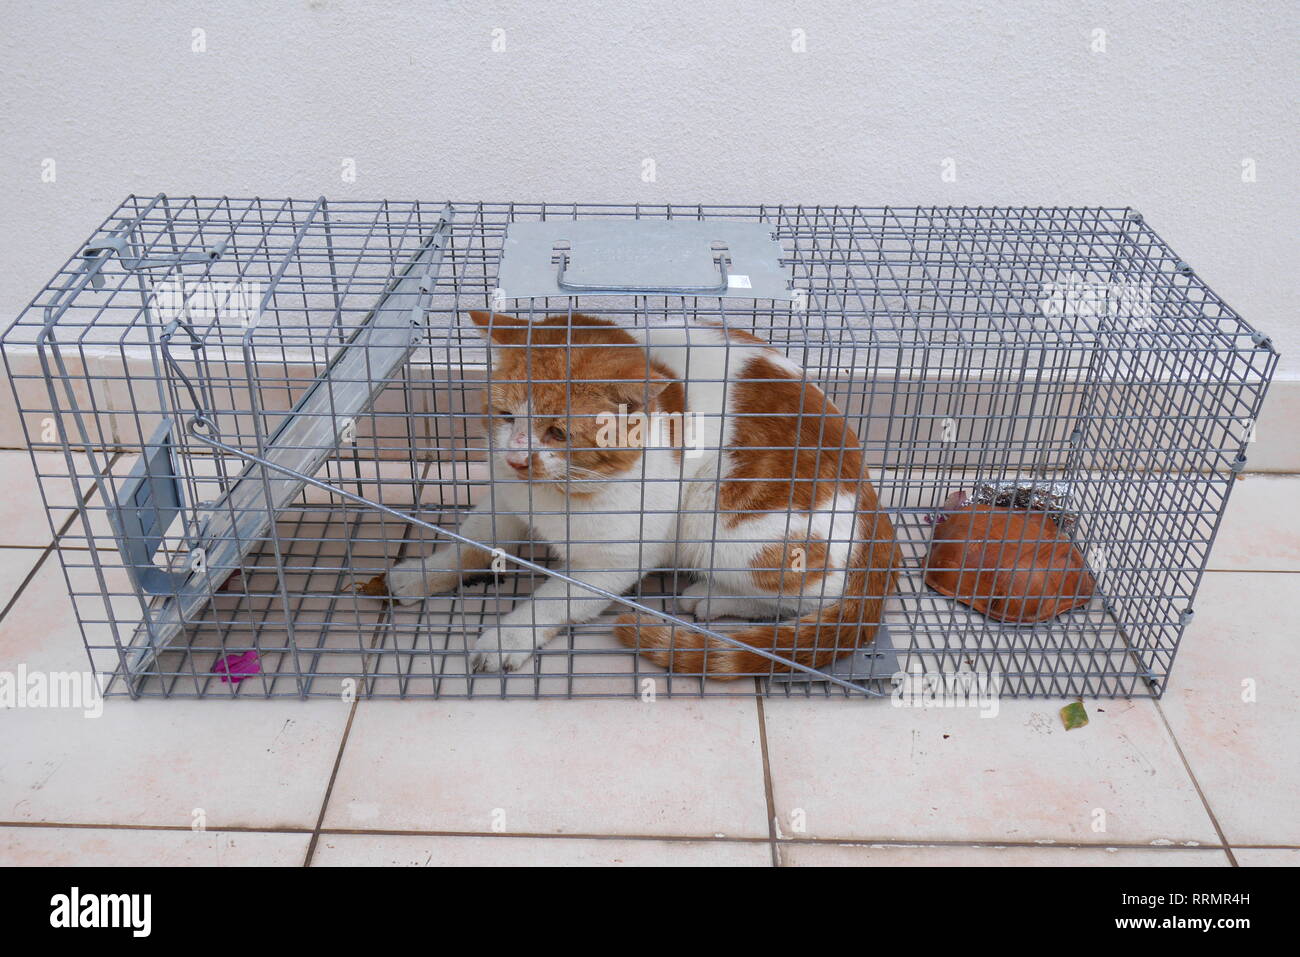 Feral cat caught in a humane cat trap prior to being neutered and released, Kingdom of Bahrain Stock Photo